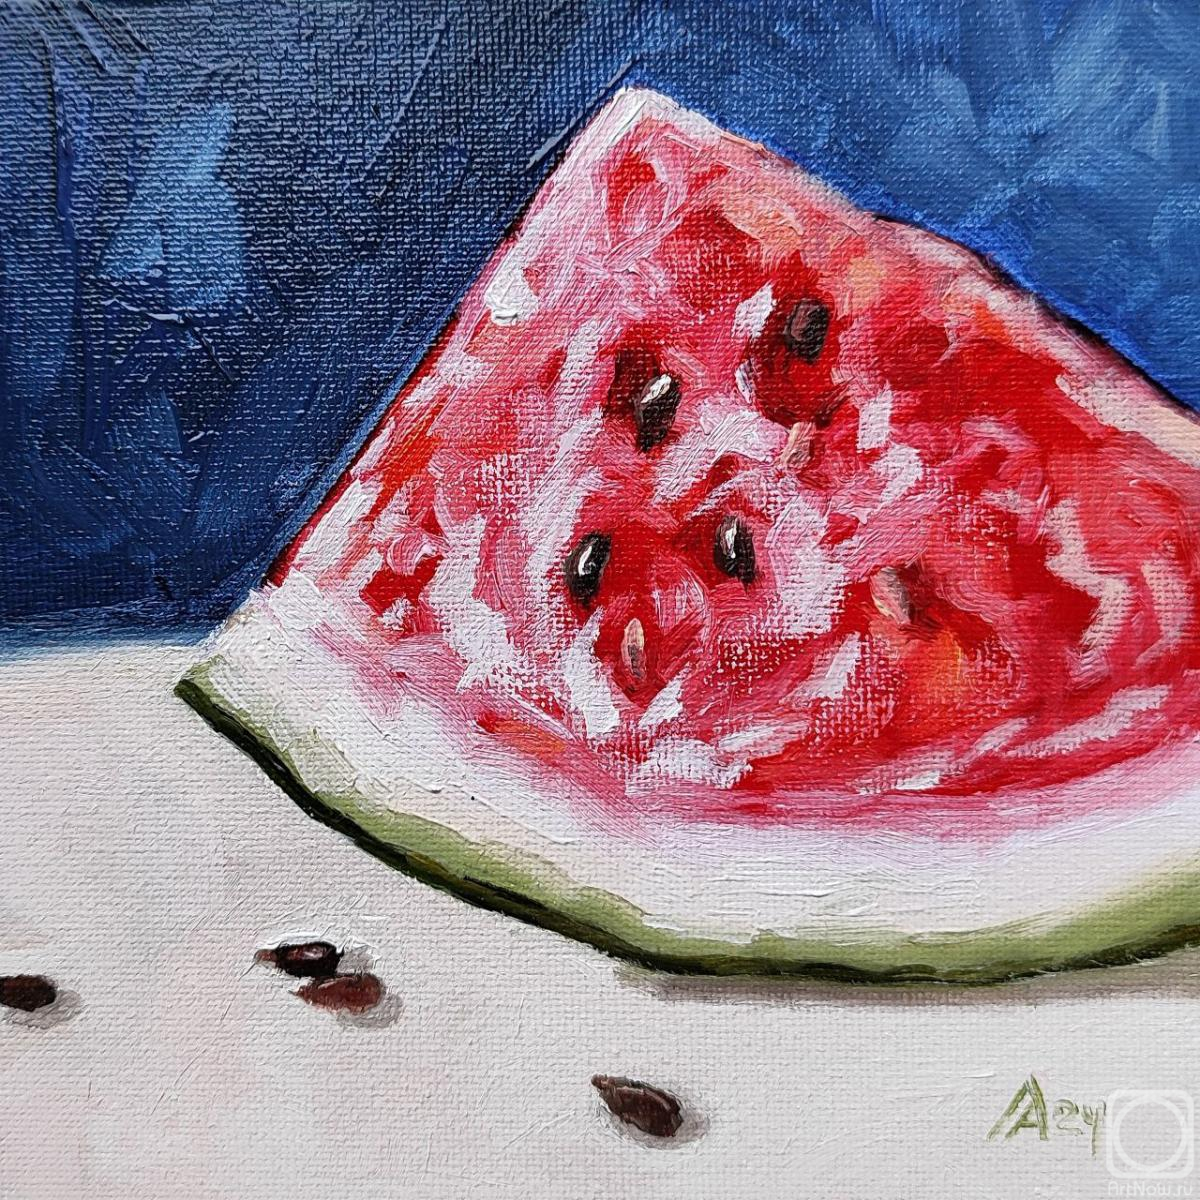 Lapina Albina. Watermelon painting original oil art still life 6 by 6 inches fruit artwork